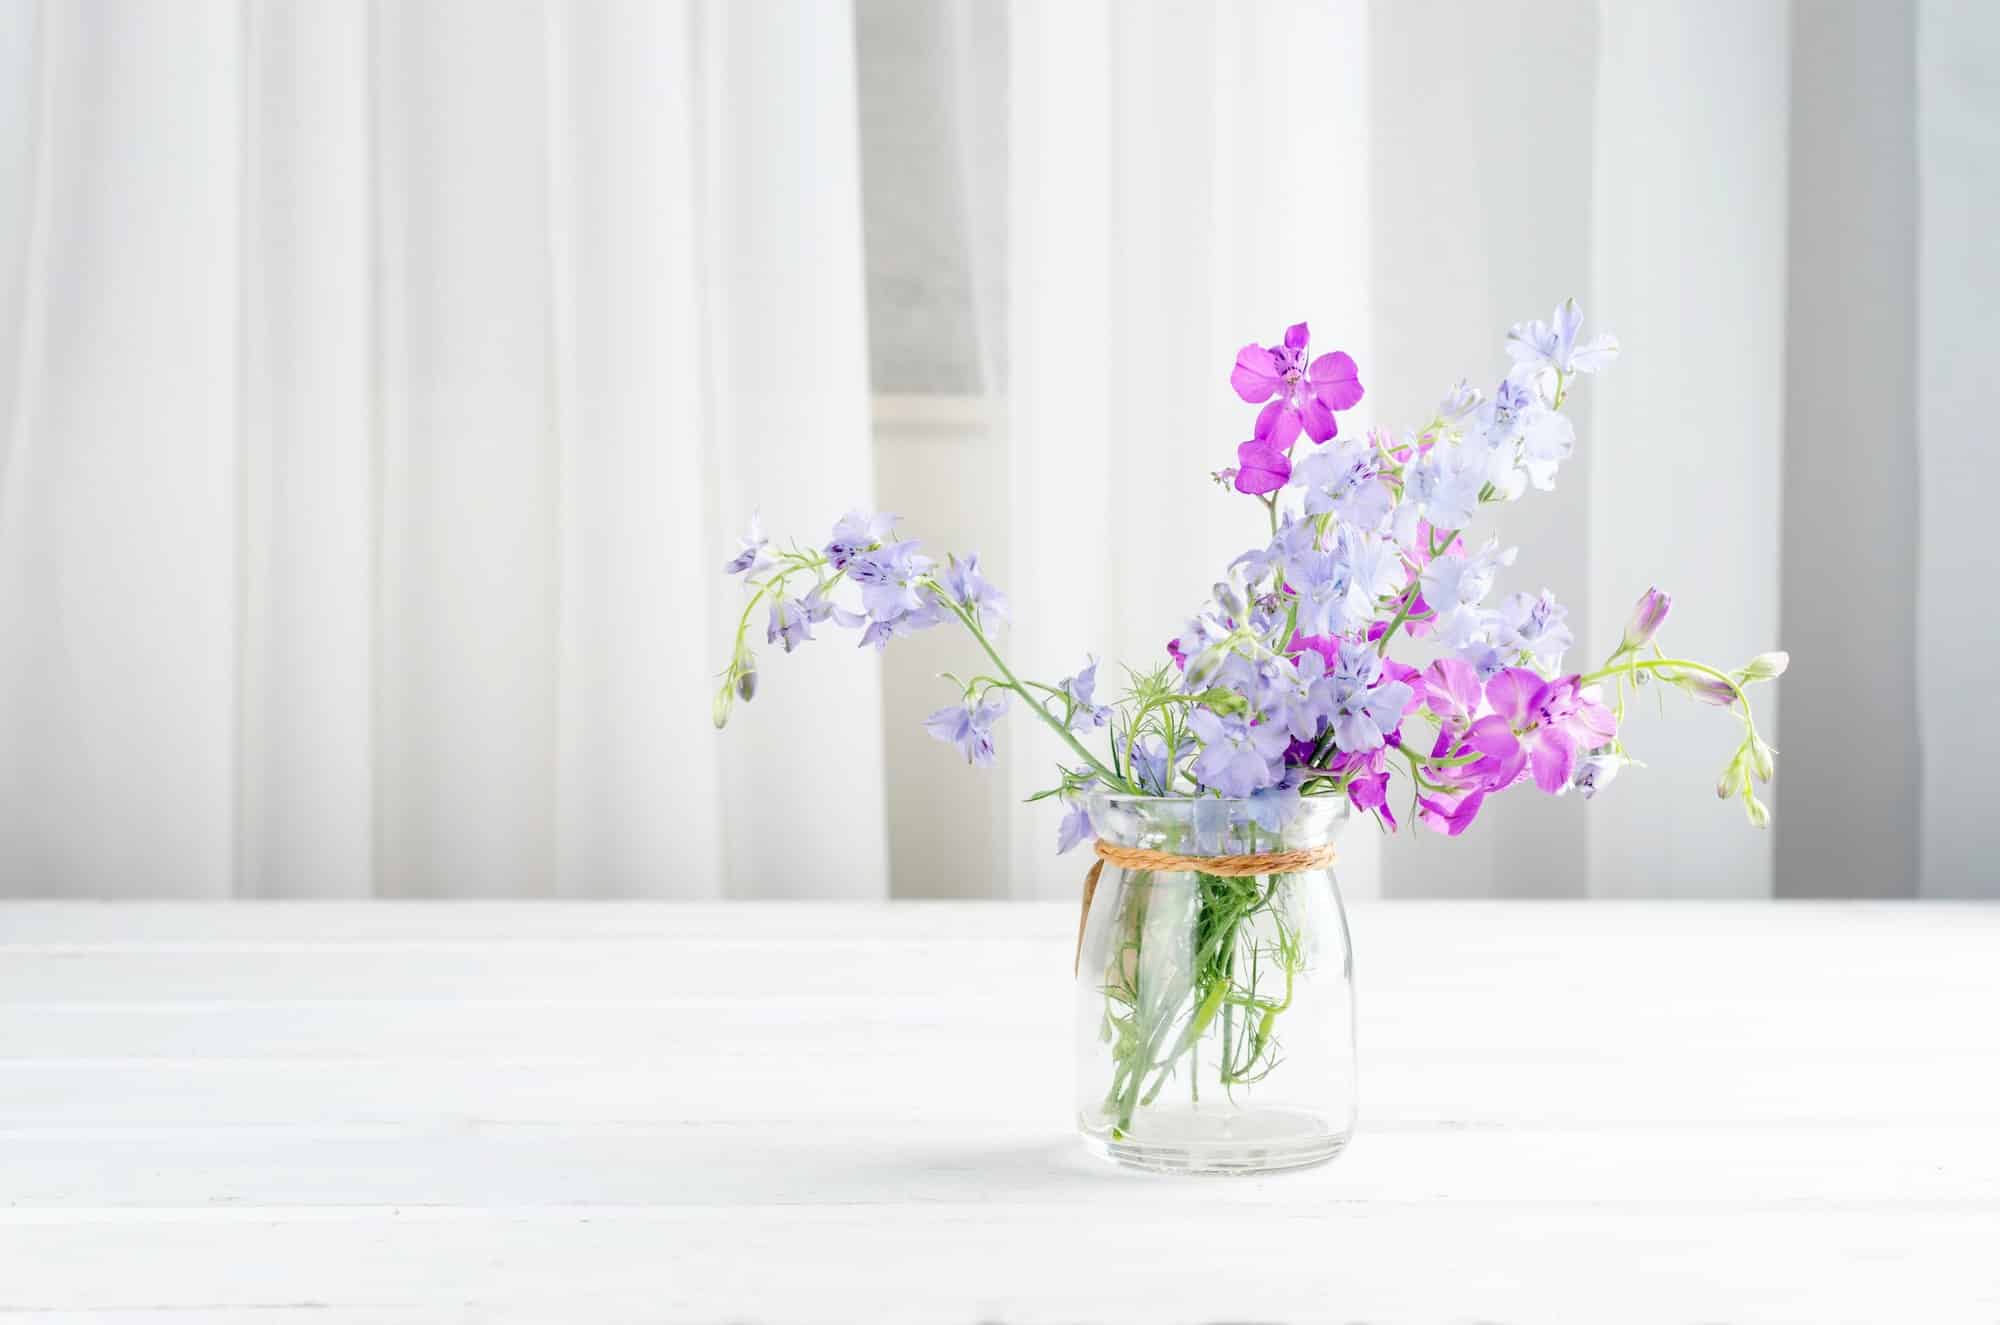 Bouquet of purple lupine flowers in a glass vase table